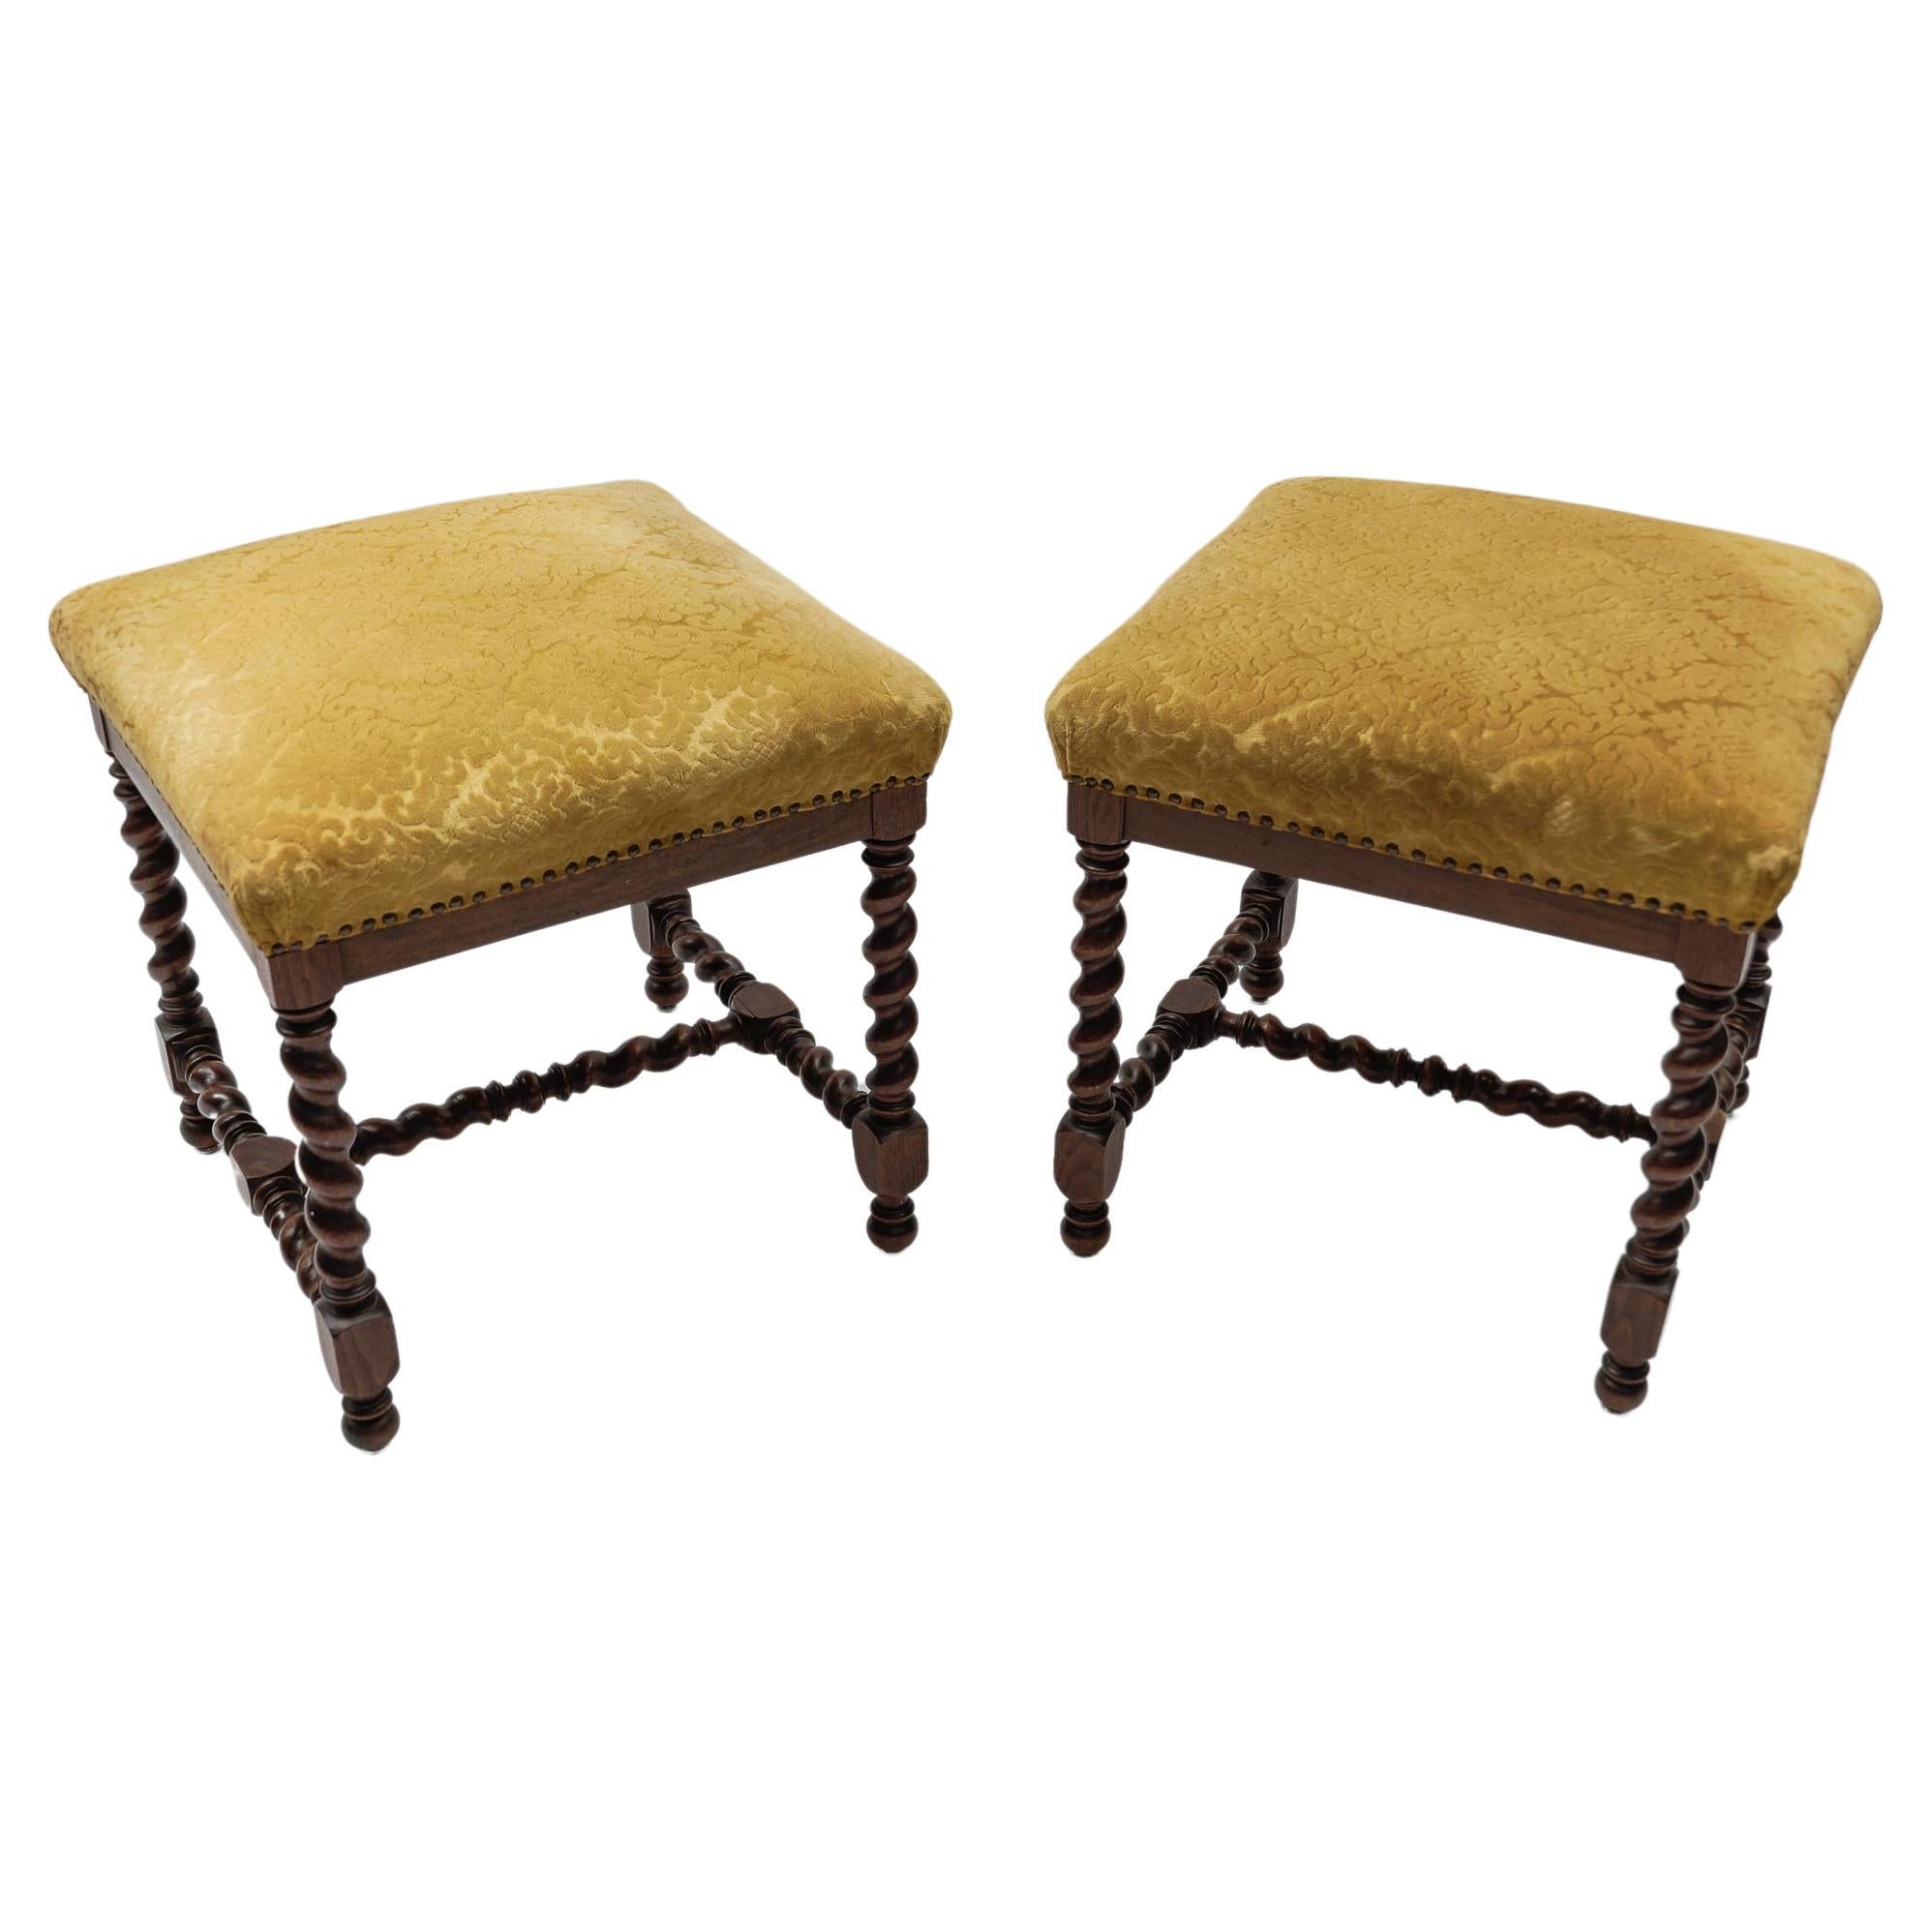 Two French Barley Wood Stools in Louis XIII Style, ca. 1870s